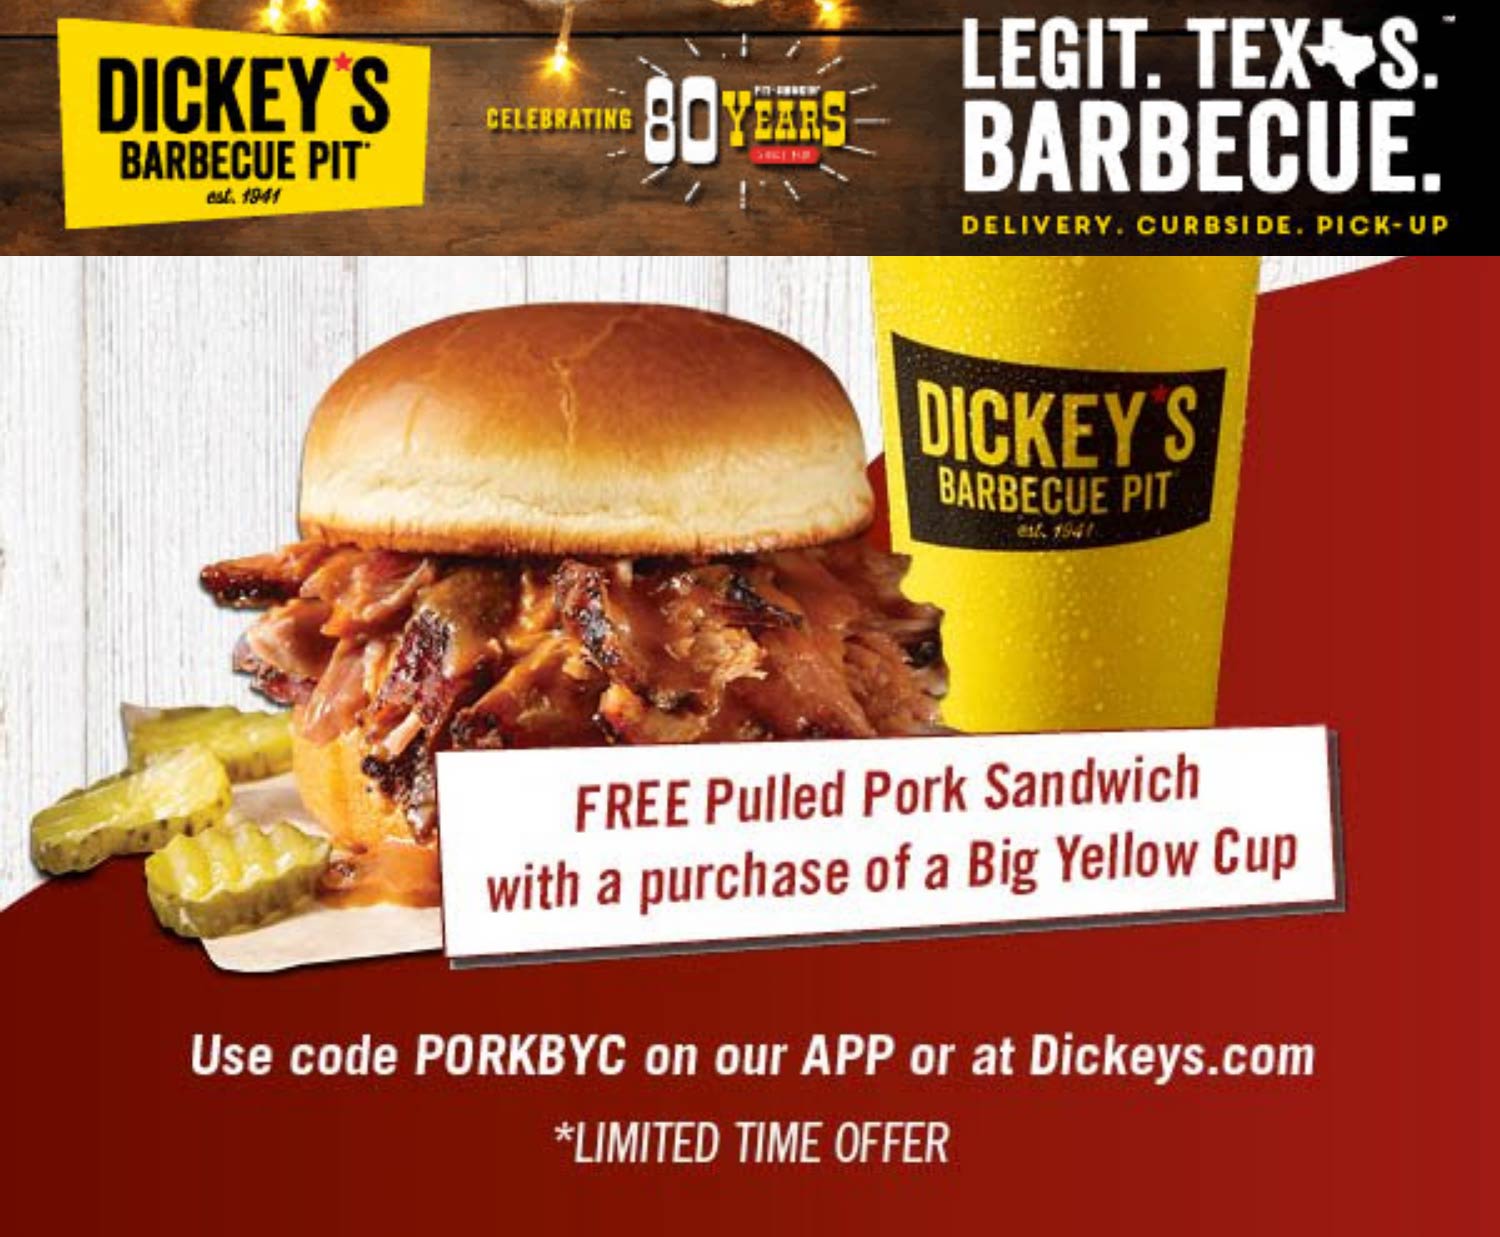 Dickeys Barbecue Pit coupons & promo code for [November 2022]